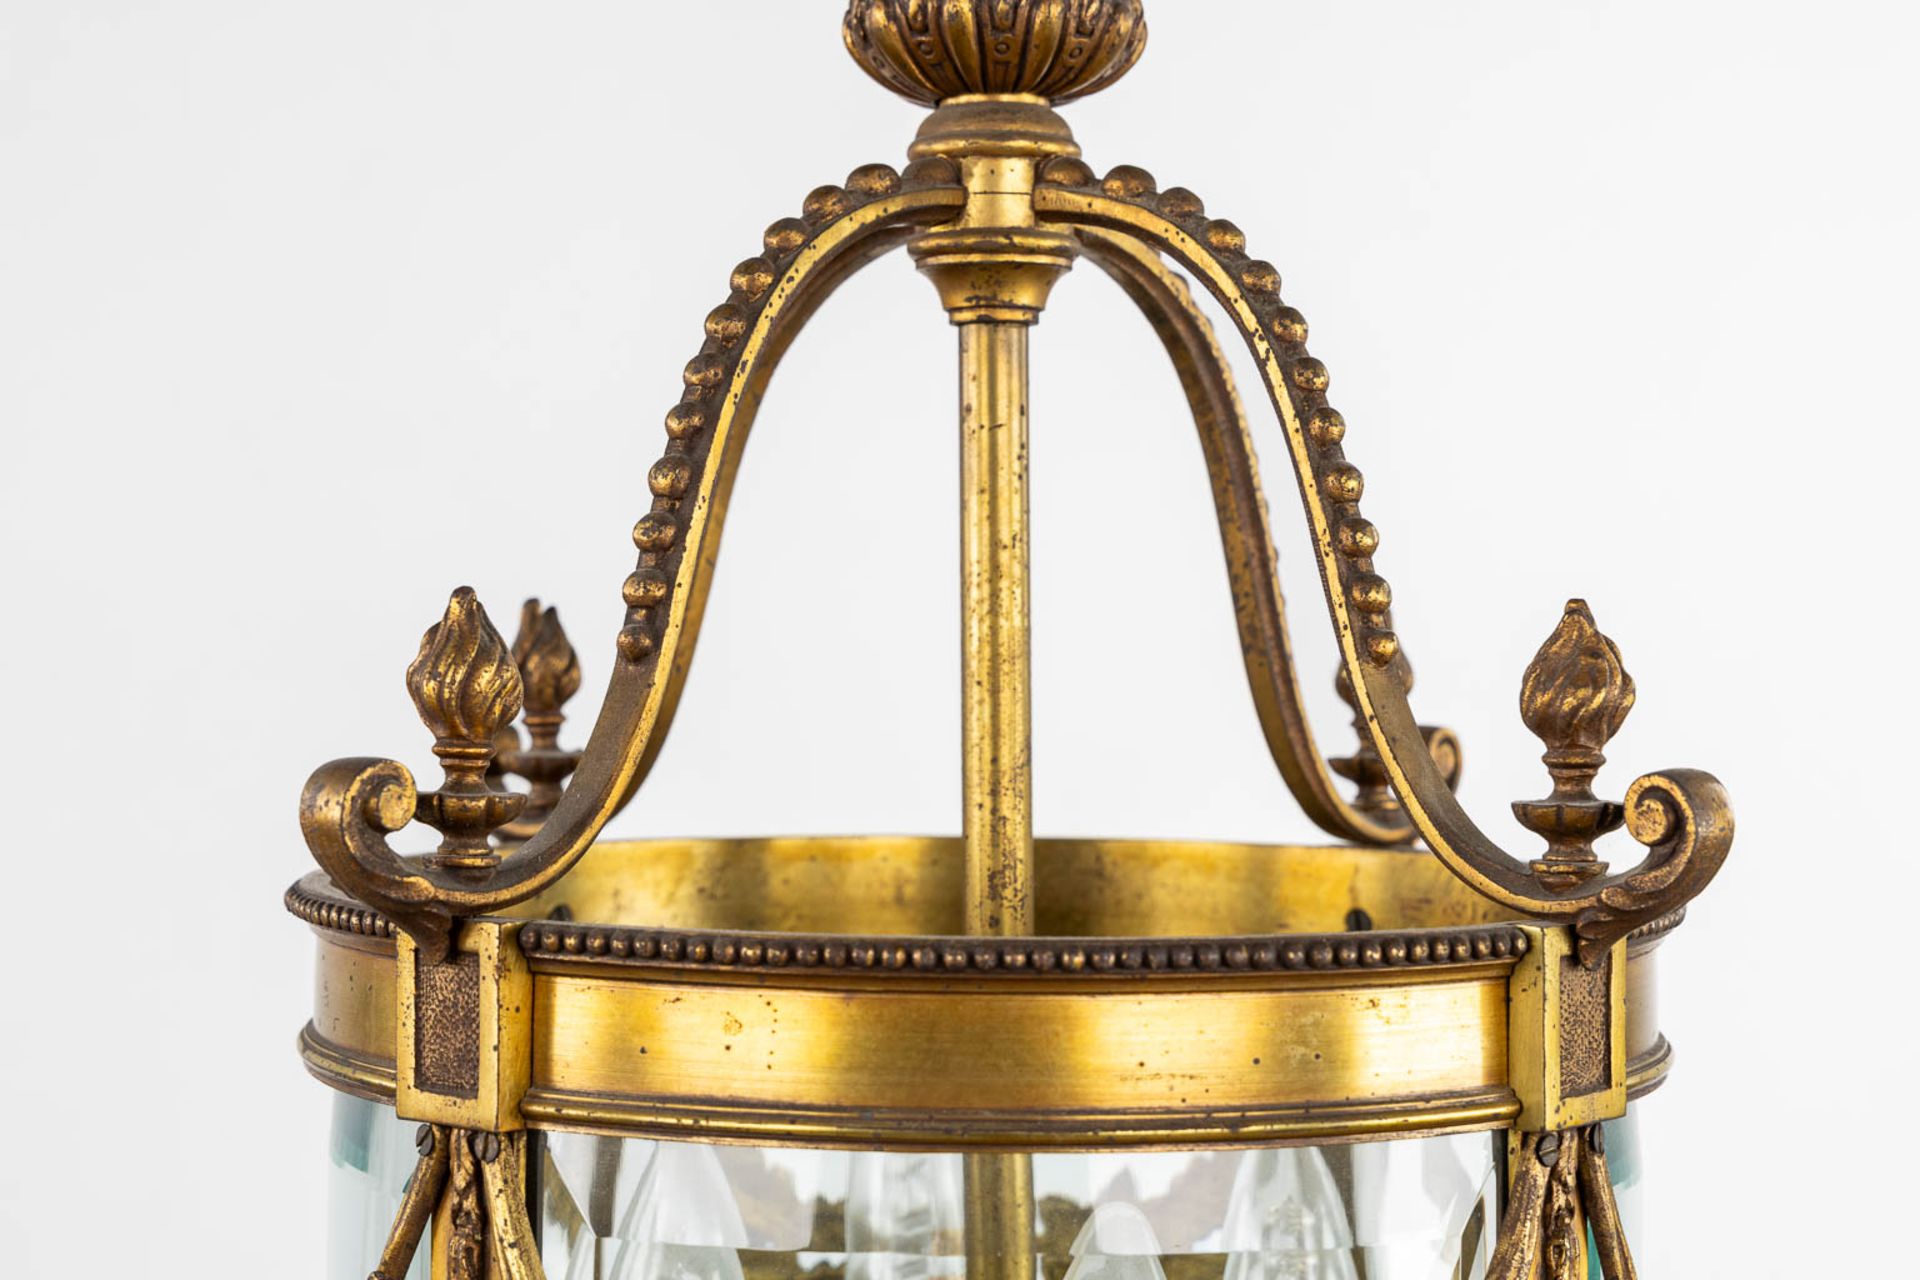 A lantern, brass and glass in Louis XVI style. (H:68 x D:37 cm) - Image 5 of 11